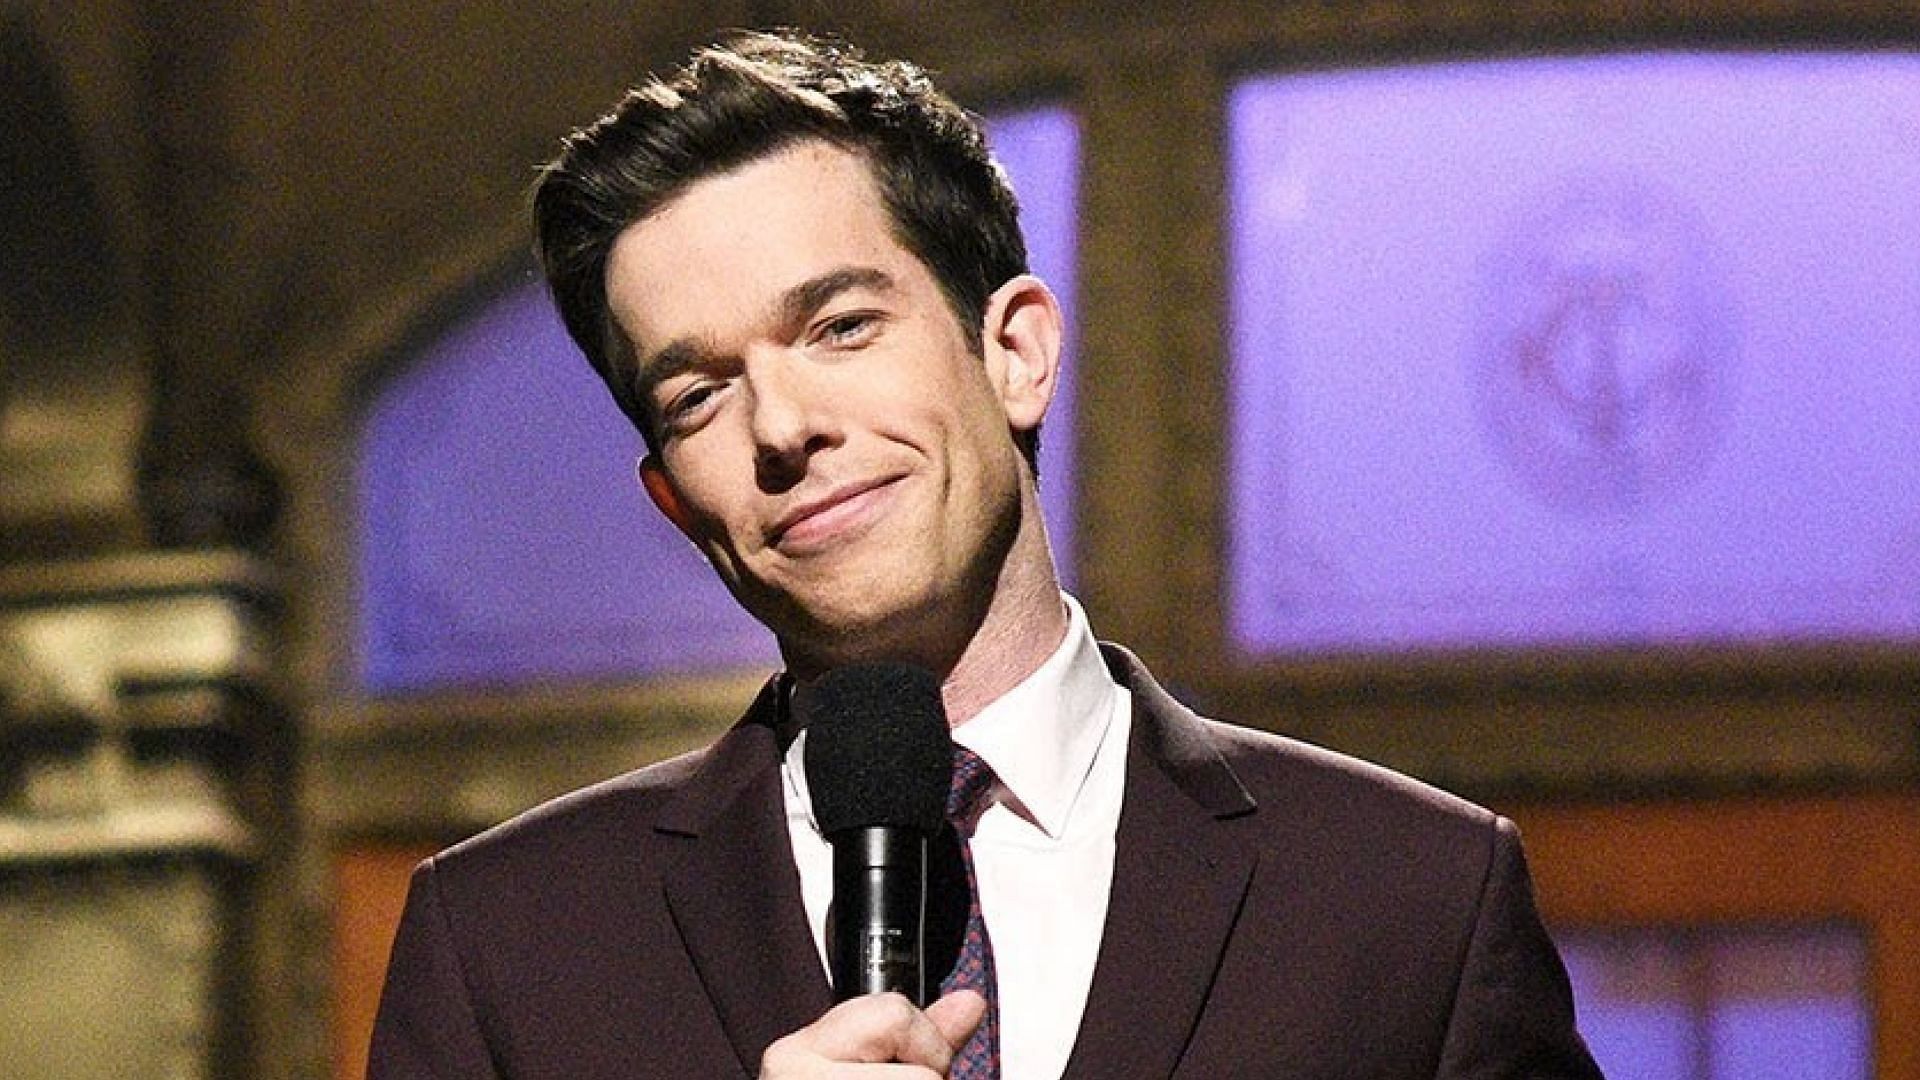 John Mulaney will host the upcoming SNL episode (Image via IndieWire)